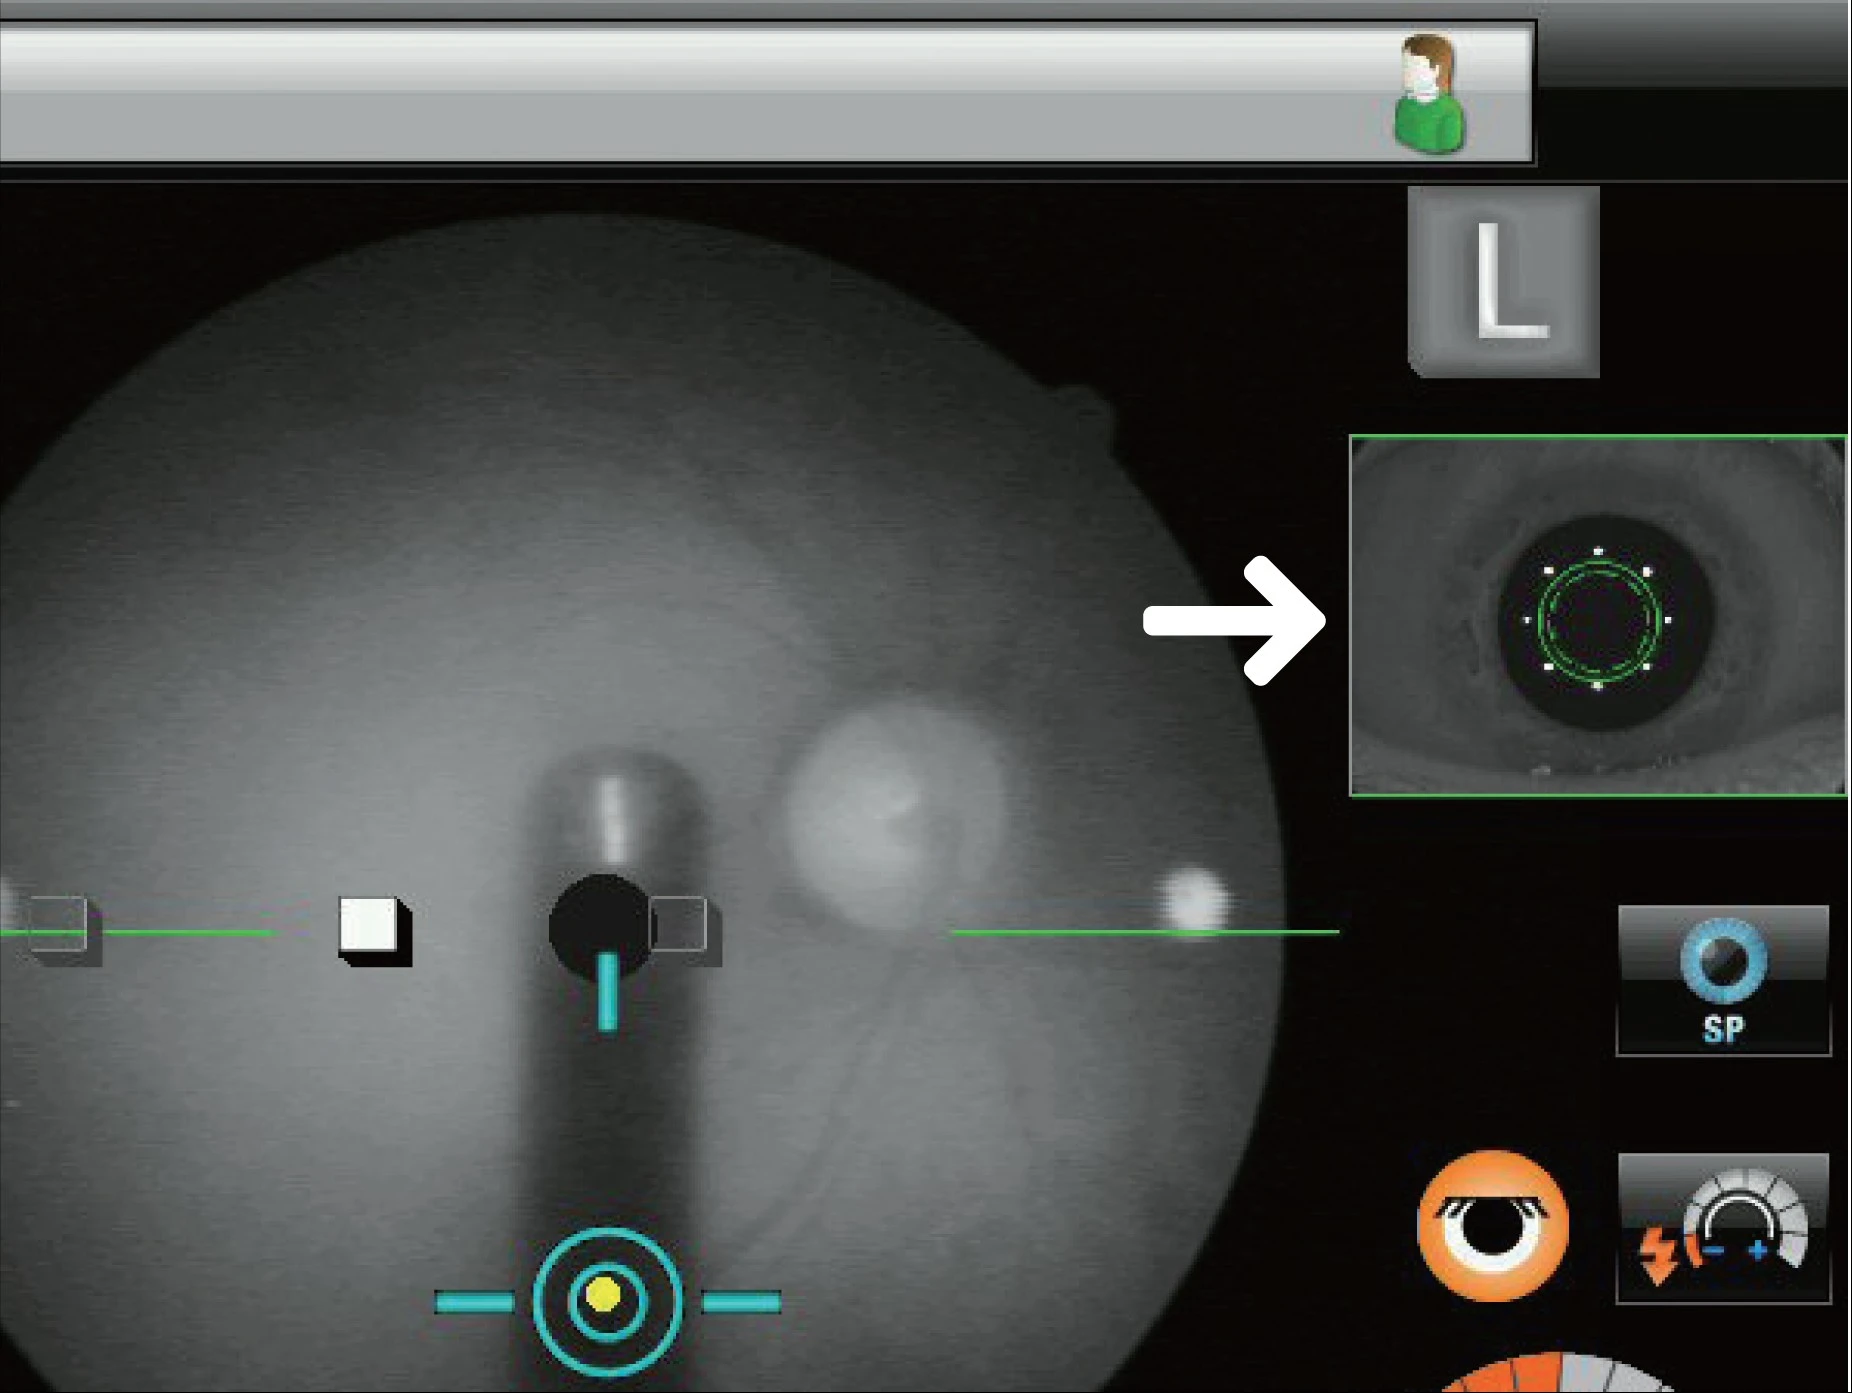 A Computer Screen Displaying A Nidek Medical Imaging Interface Focused On An Eye. The Main Image Highlights The Eye With Various Overlays, And A Smaller Inset Image At The Top Right Shows A Close-Up Of The Eye, Highlighted By An Arrow. Various Controls Are Visible On The Screen.